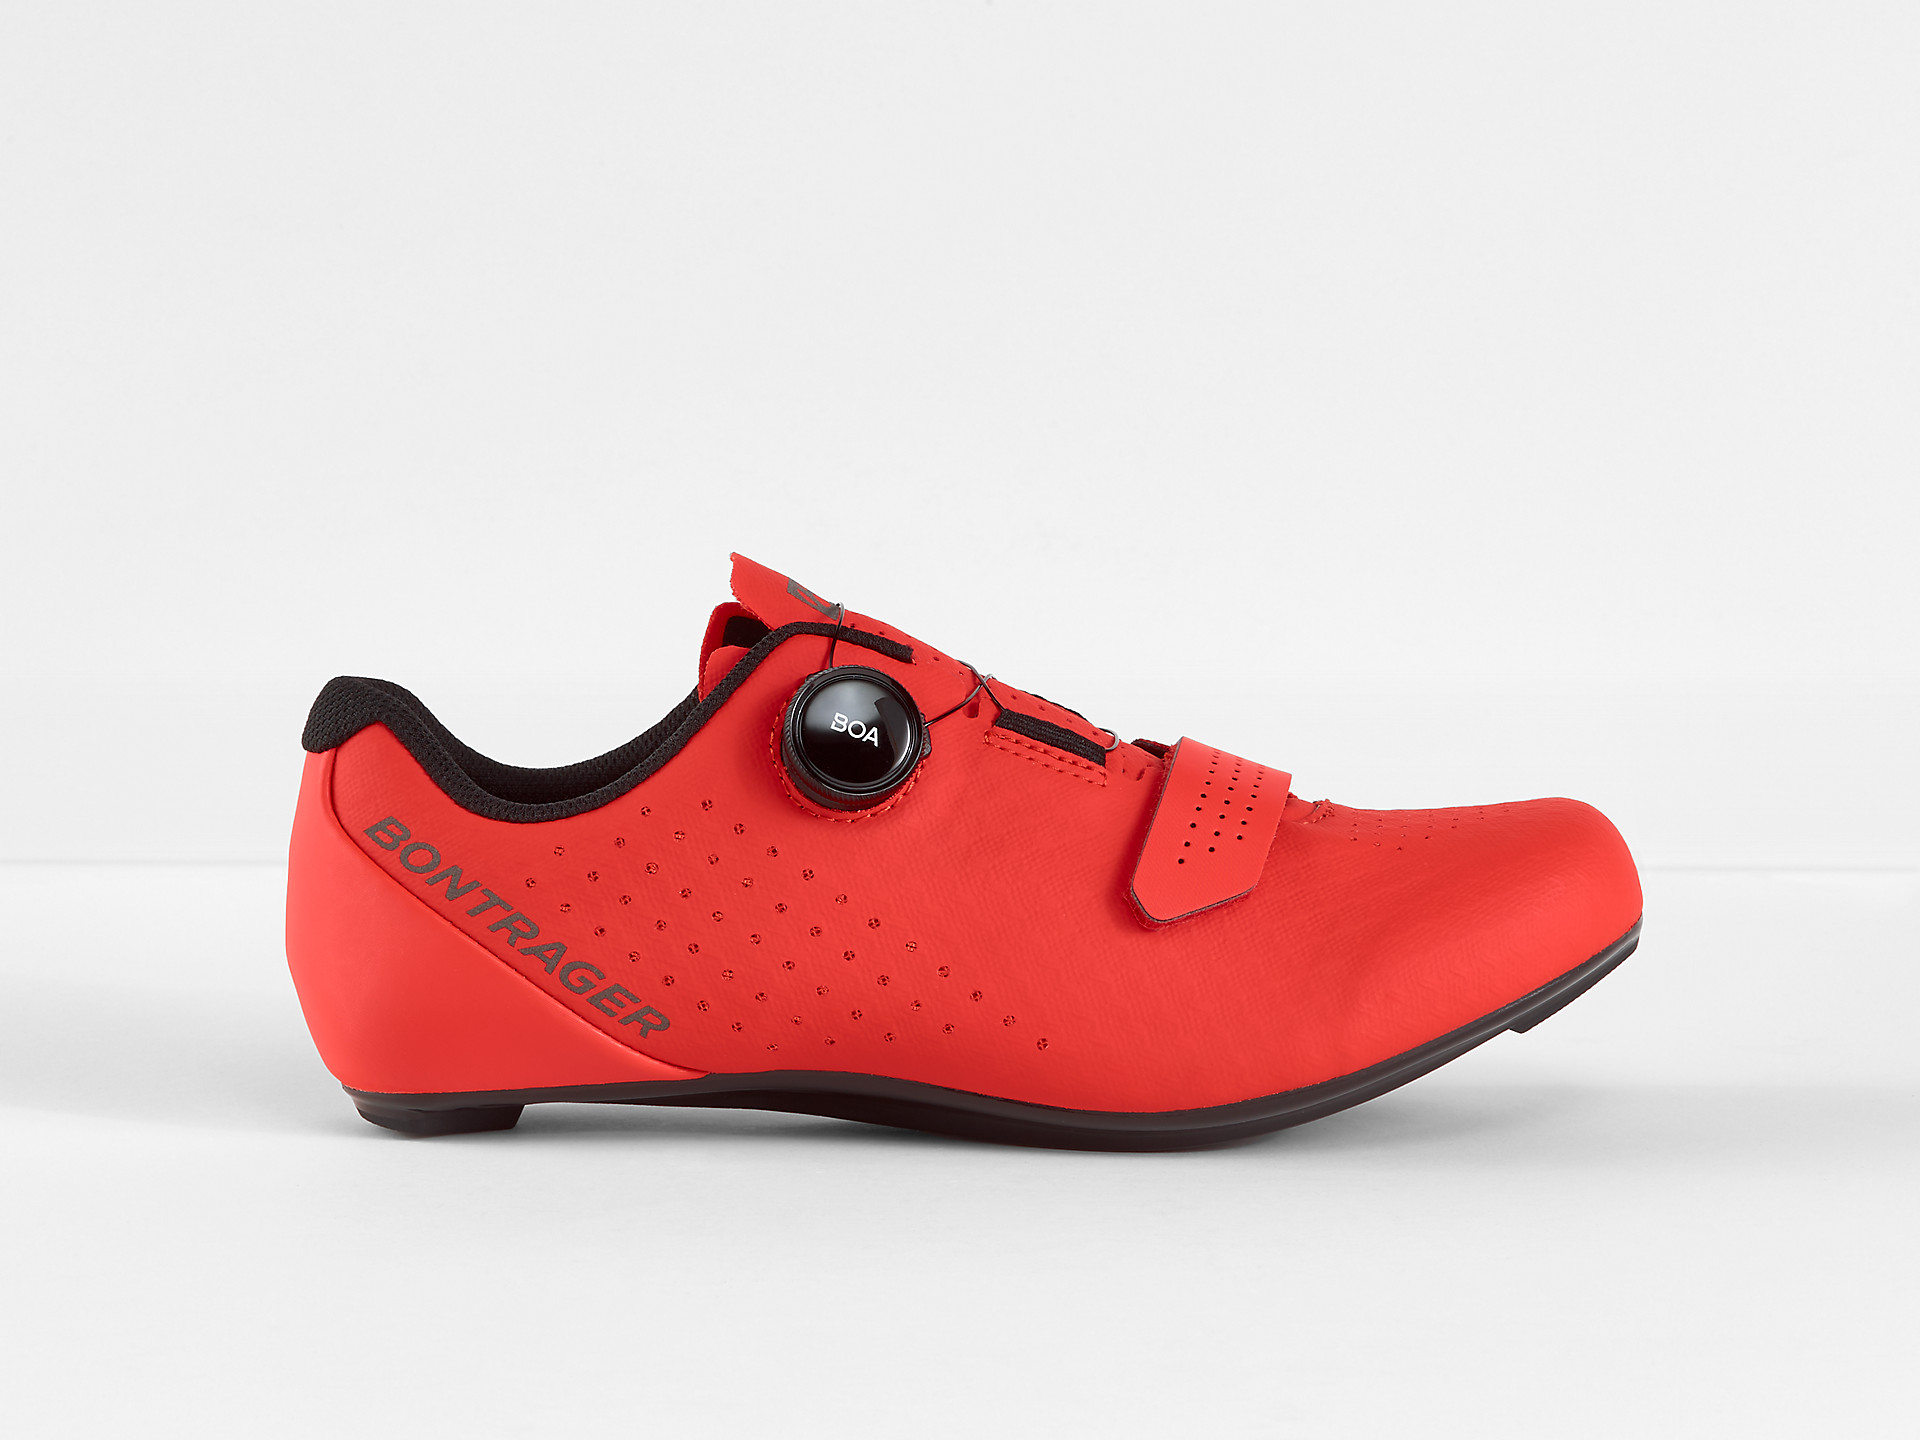 <a href="https://cycles-clement.be/product/chaussure-bont-circuit-race-45-red/">CHAUSSURE BONT CIRCUIT RACE 45 RED</a>